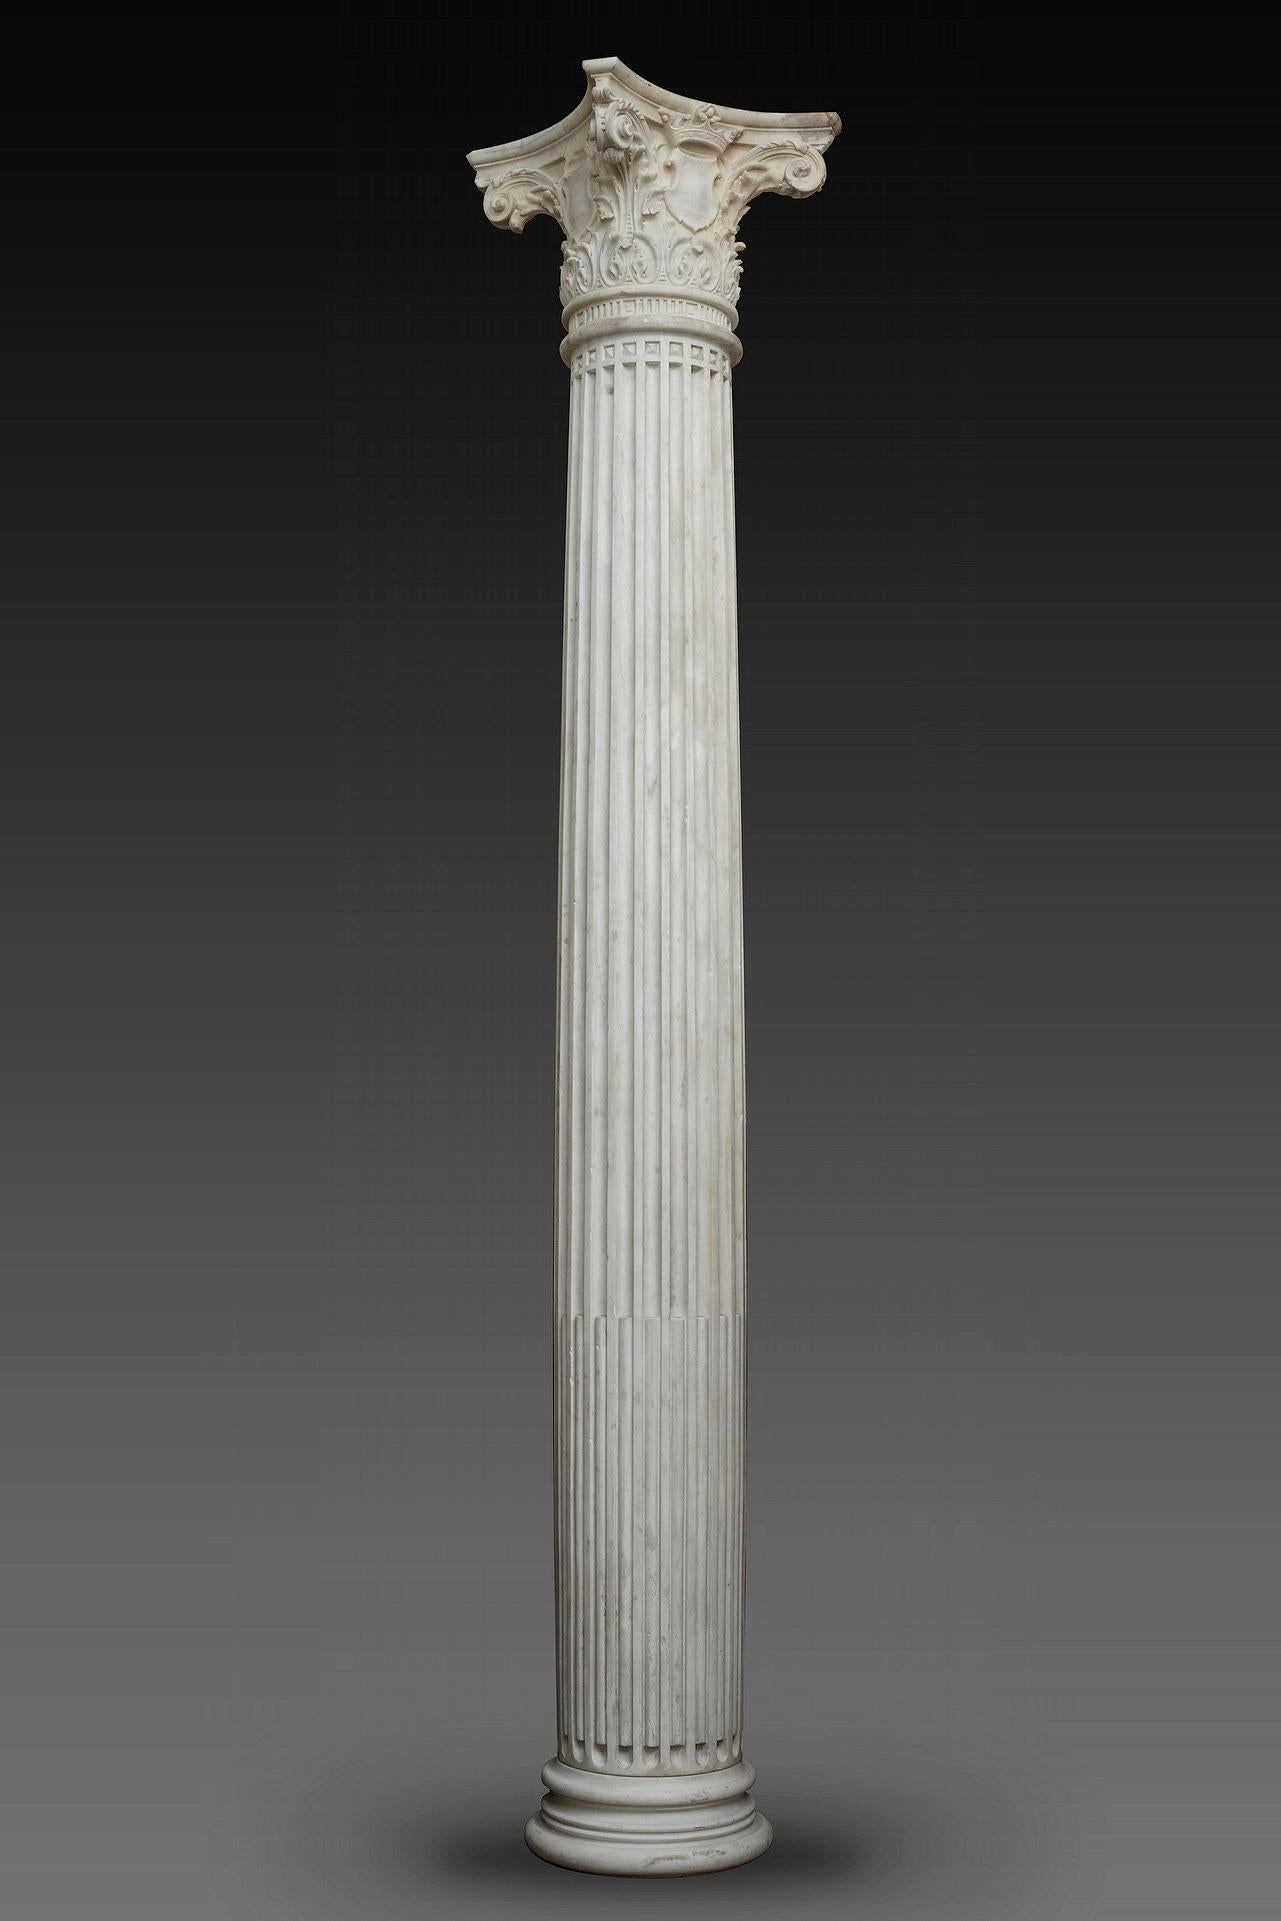 Set of four Corinthian columns, each standing on an octagonal base surmounted by a moulded socle with torus. The fluted and reeded shaft is topped with a sculpted band of diamond-shaped motifs. Each column is topped by a capital sculpted with a